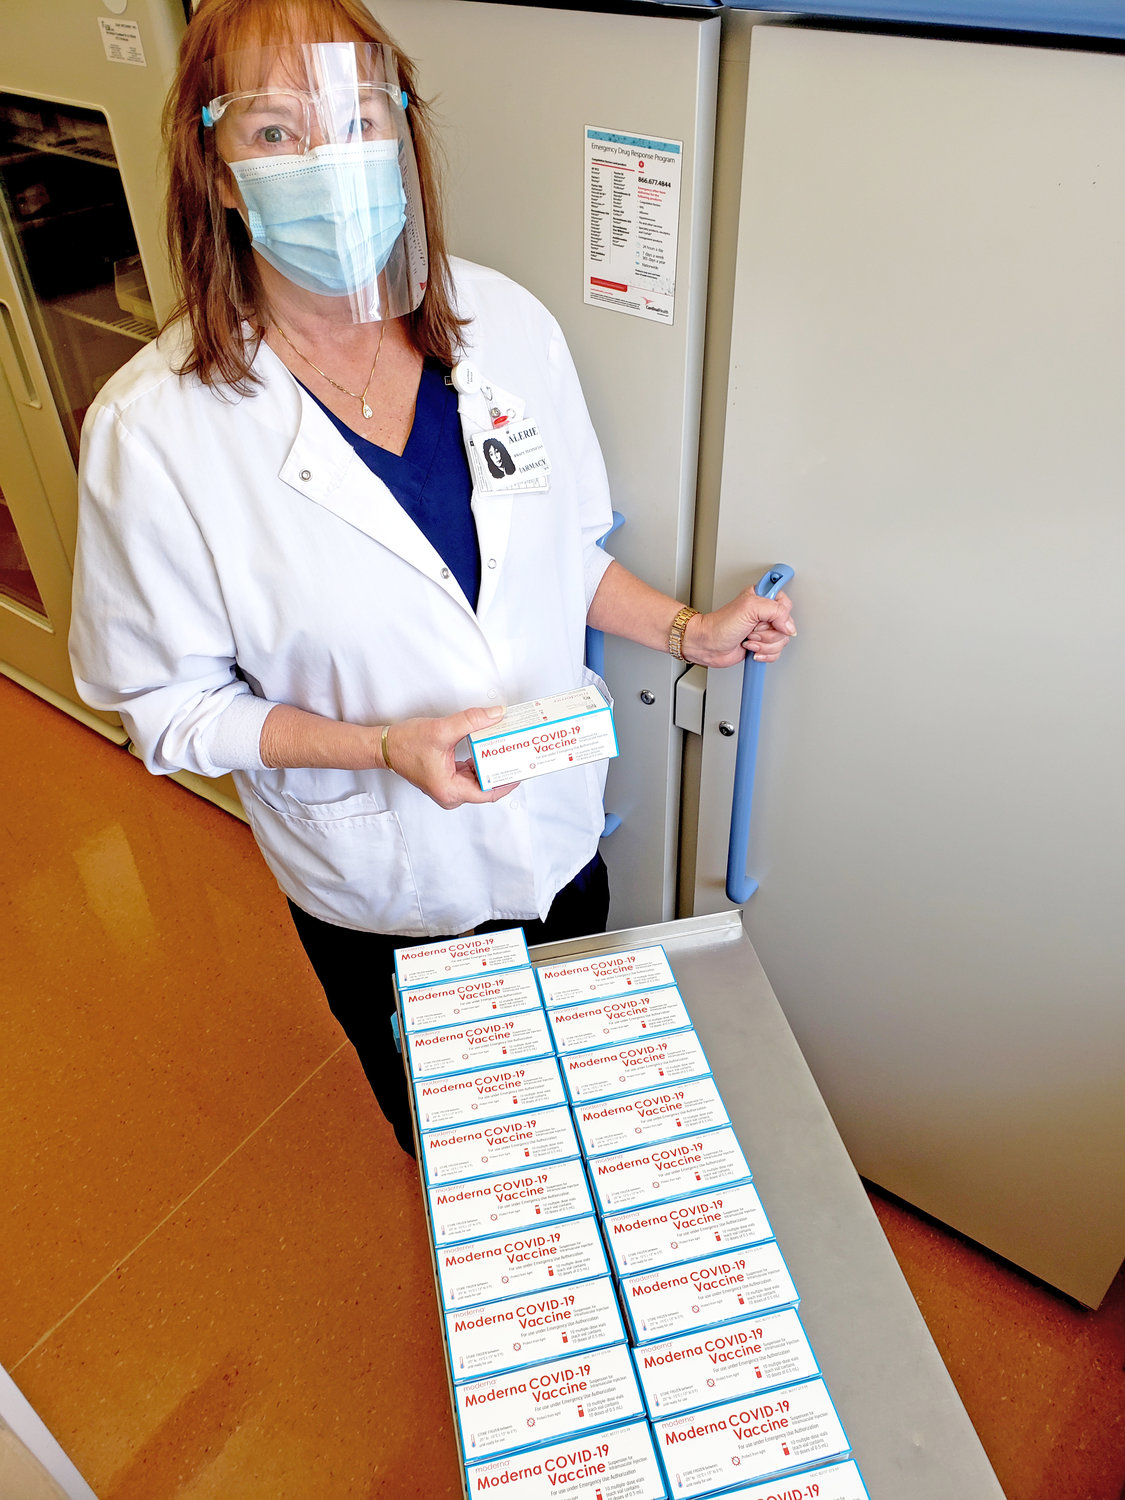 FIRST SHIPMENT RECEIVED — Pharmacy Technician Valerie Destito is pictured receiving Rome Memorial Hospital’s first shipment of Moderna vaccine Tuesday and will begin vaccinating employees at highest risk of exposure to COVID-19 beginning 7 a.m. Wednesday.